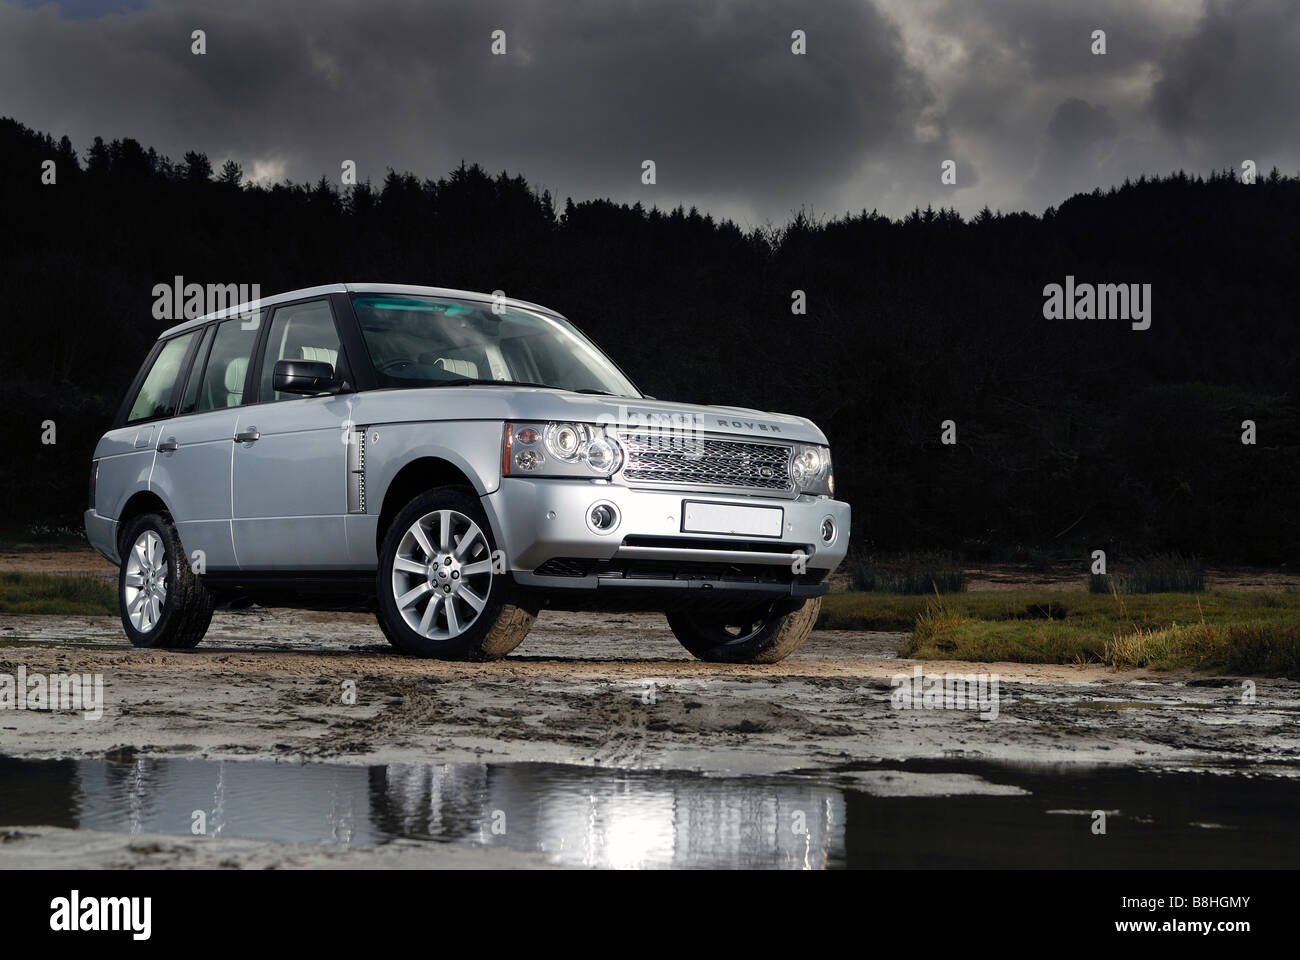 Range rover v8 stock and images - Alamy